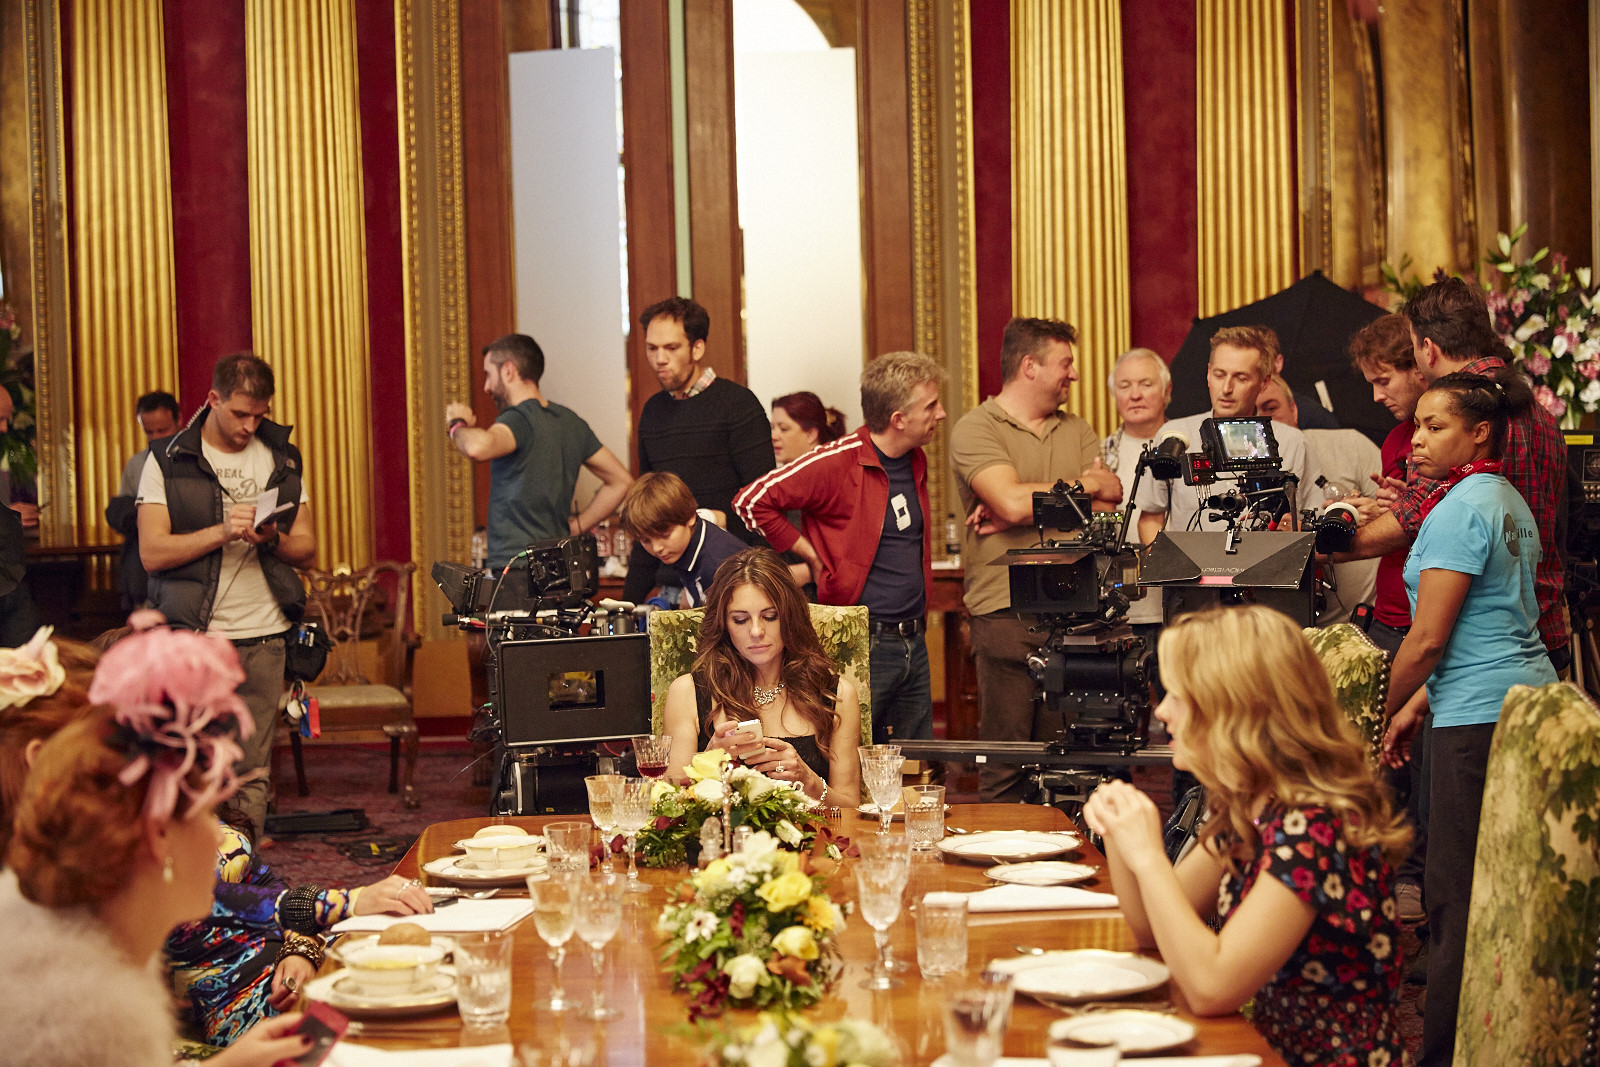 Nick (directly behind camera) on the set of The Royals with Elizabeth Hurley centre